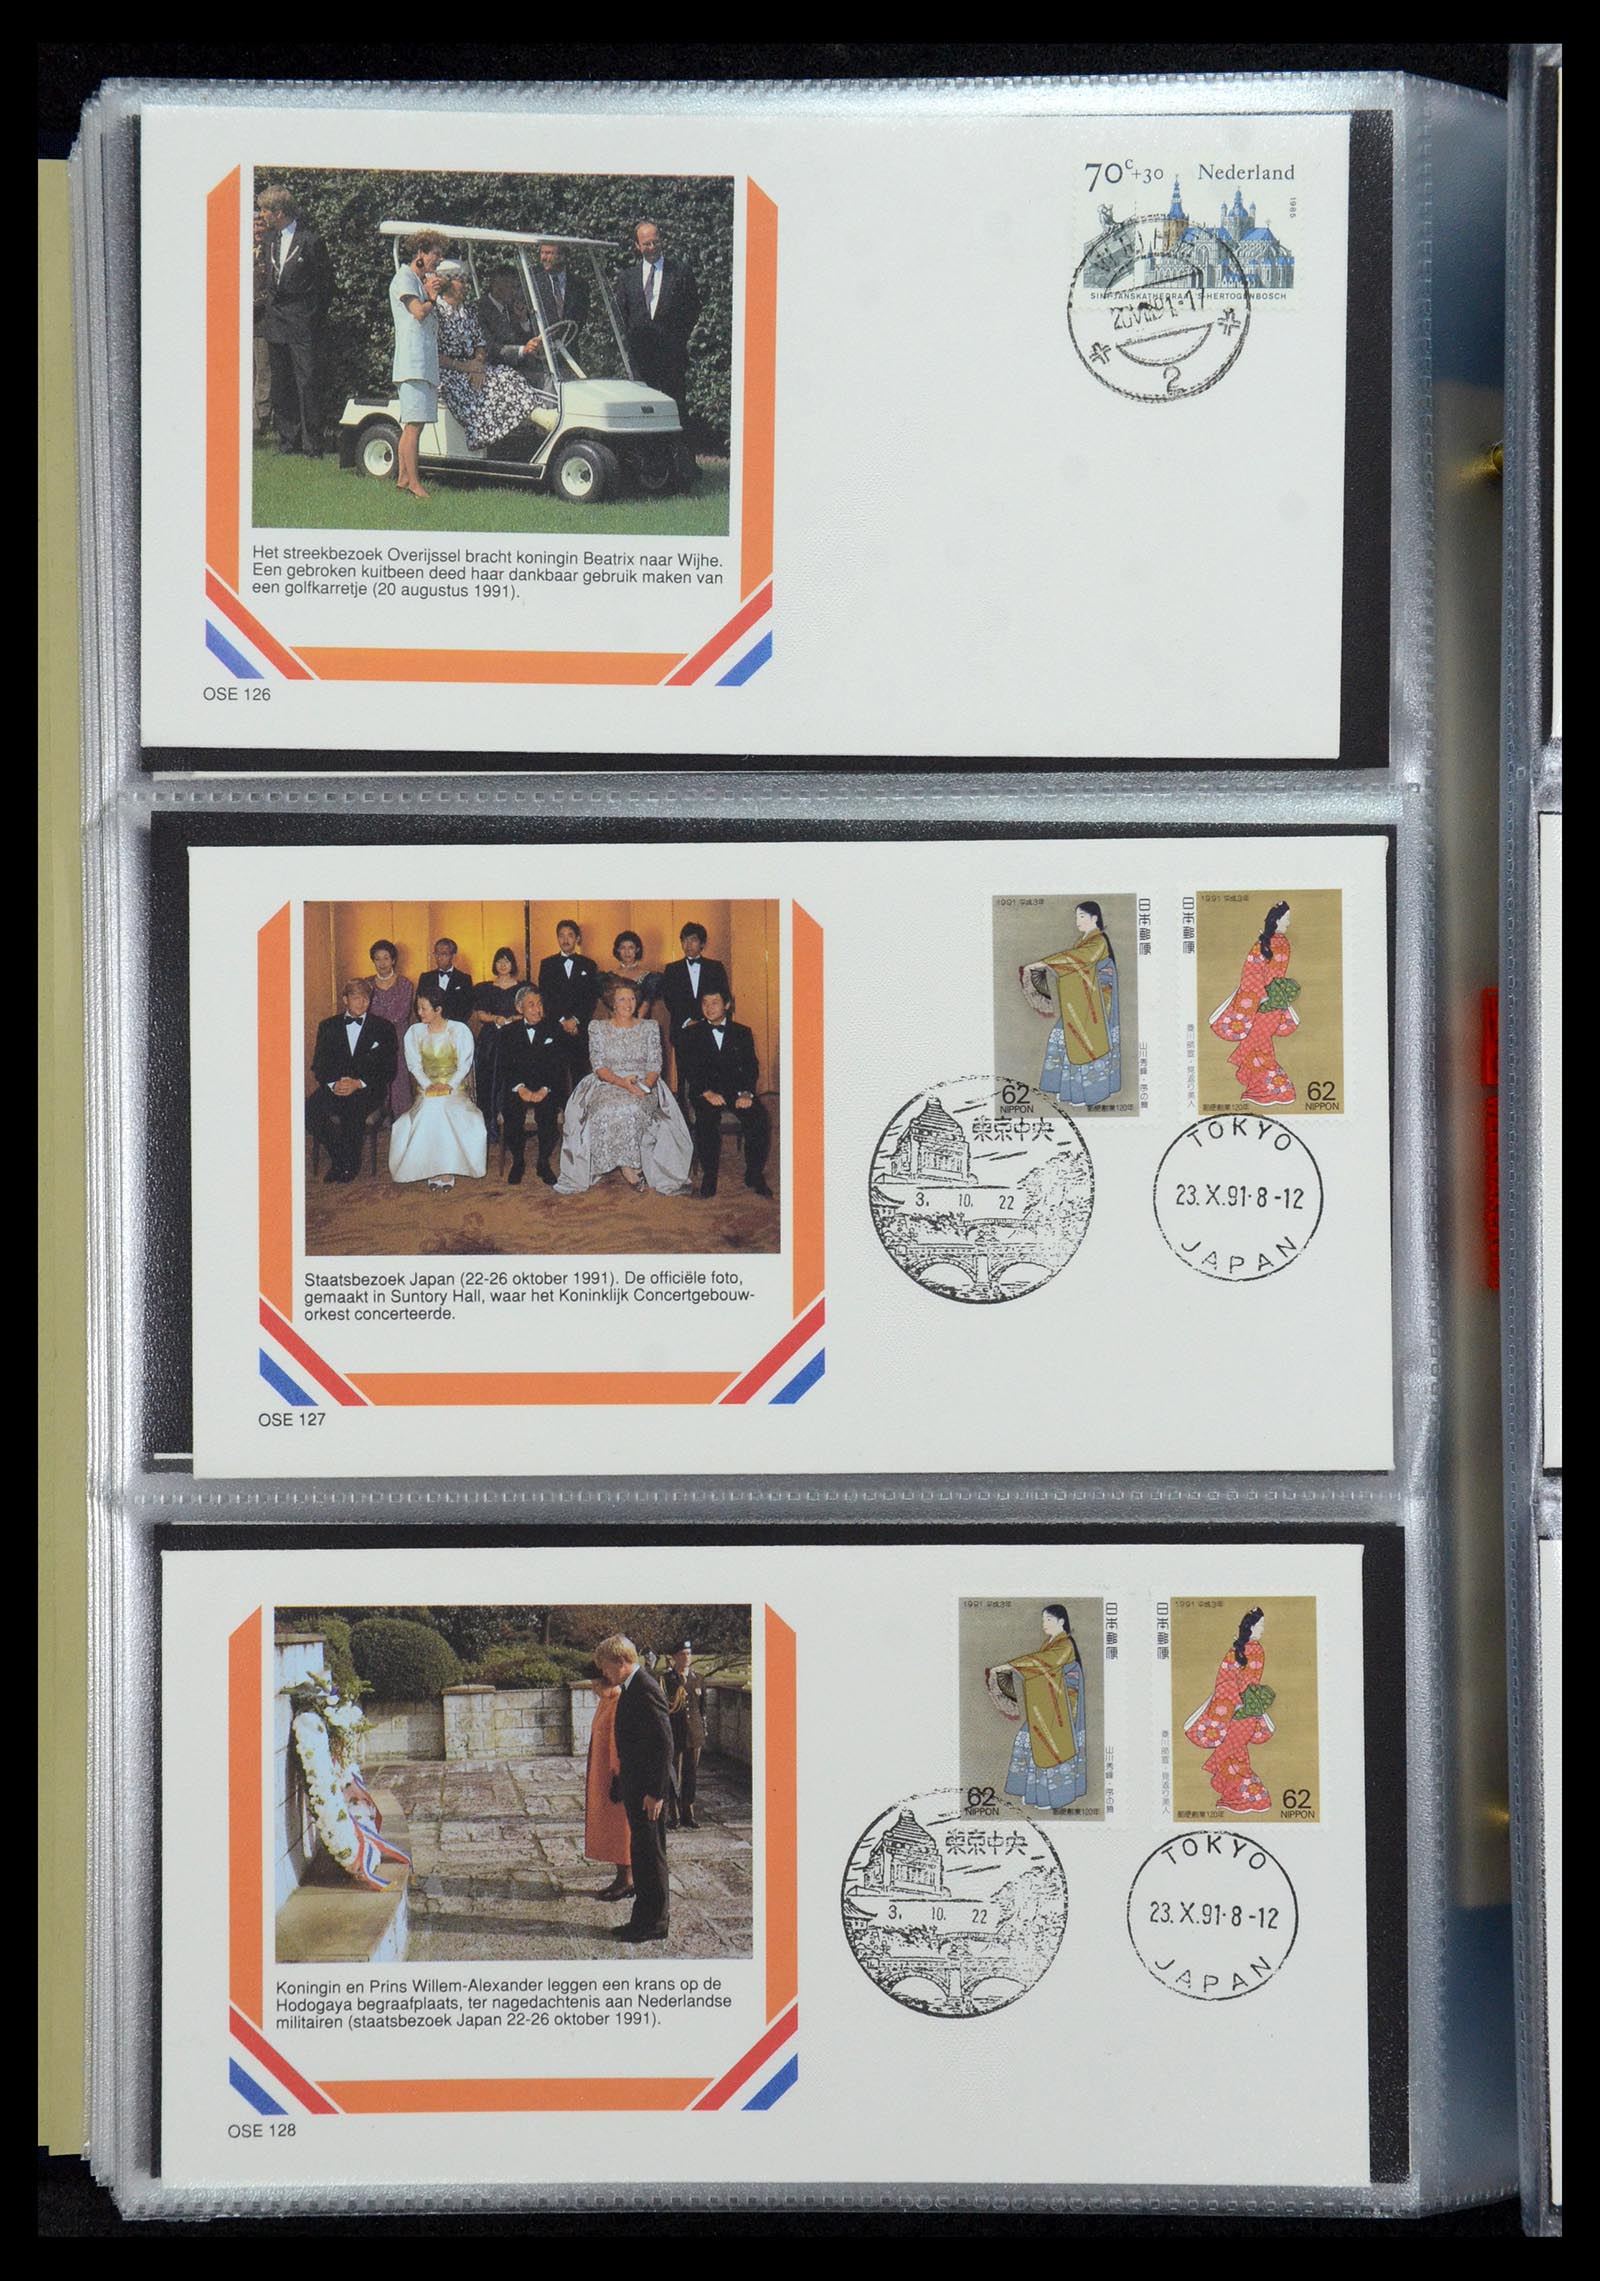 36322 045 - Stamp collection 36322 Netherlands Dutch Royal Family 1981-2013.